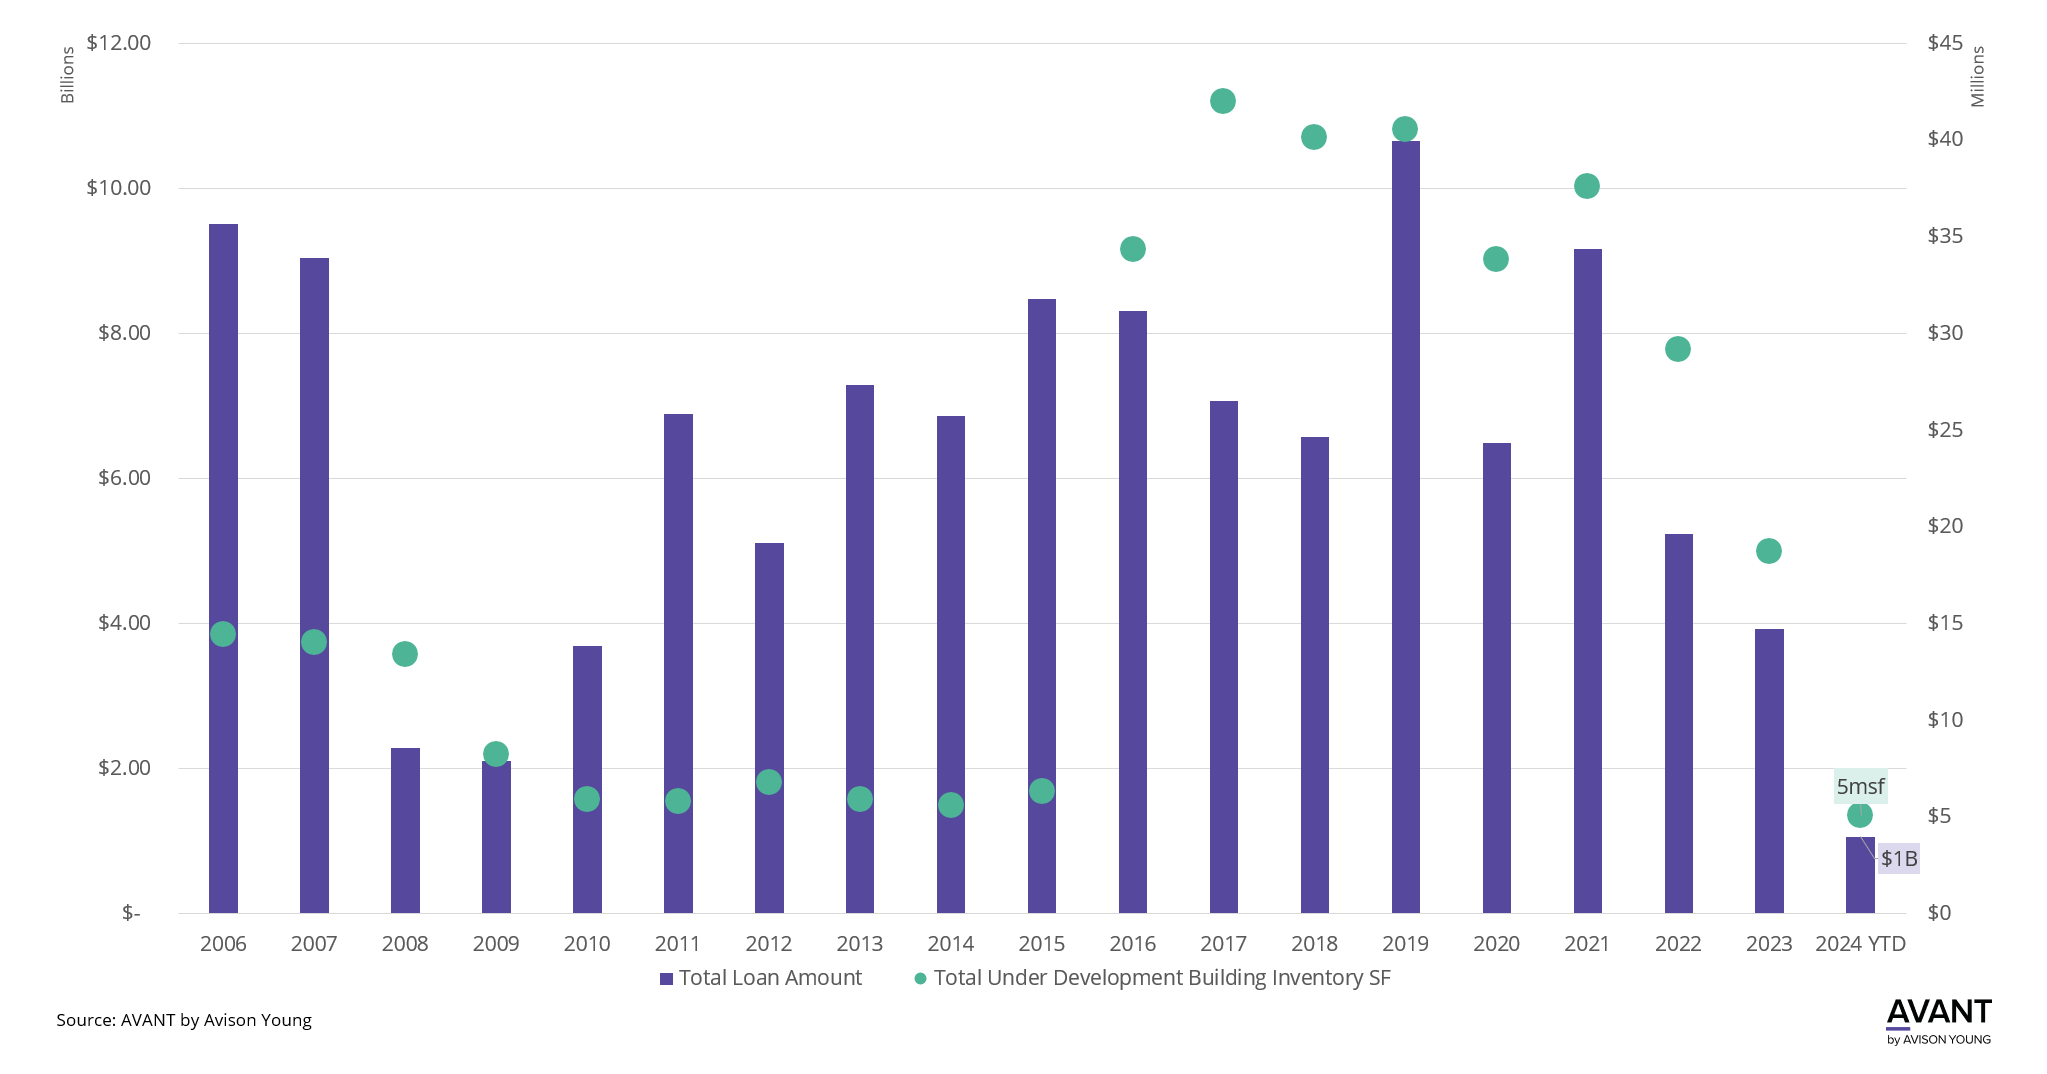 Bar graph comparing total loan amount and the total square footage under development building inventory